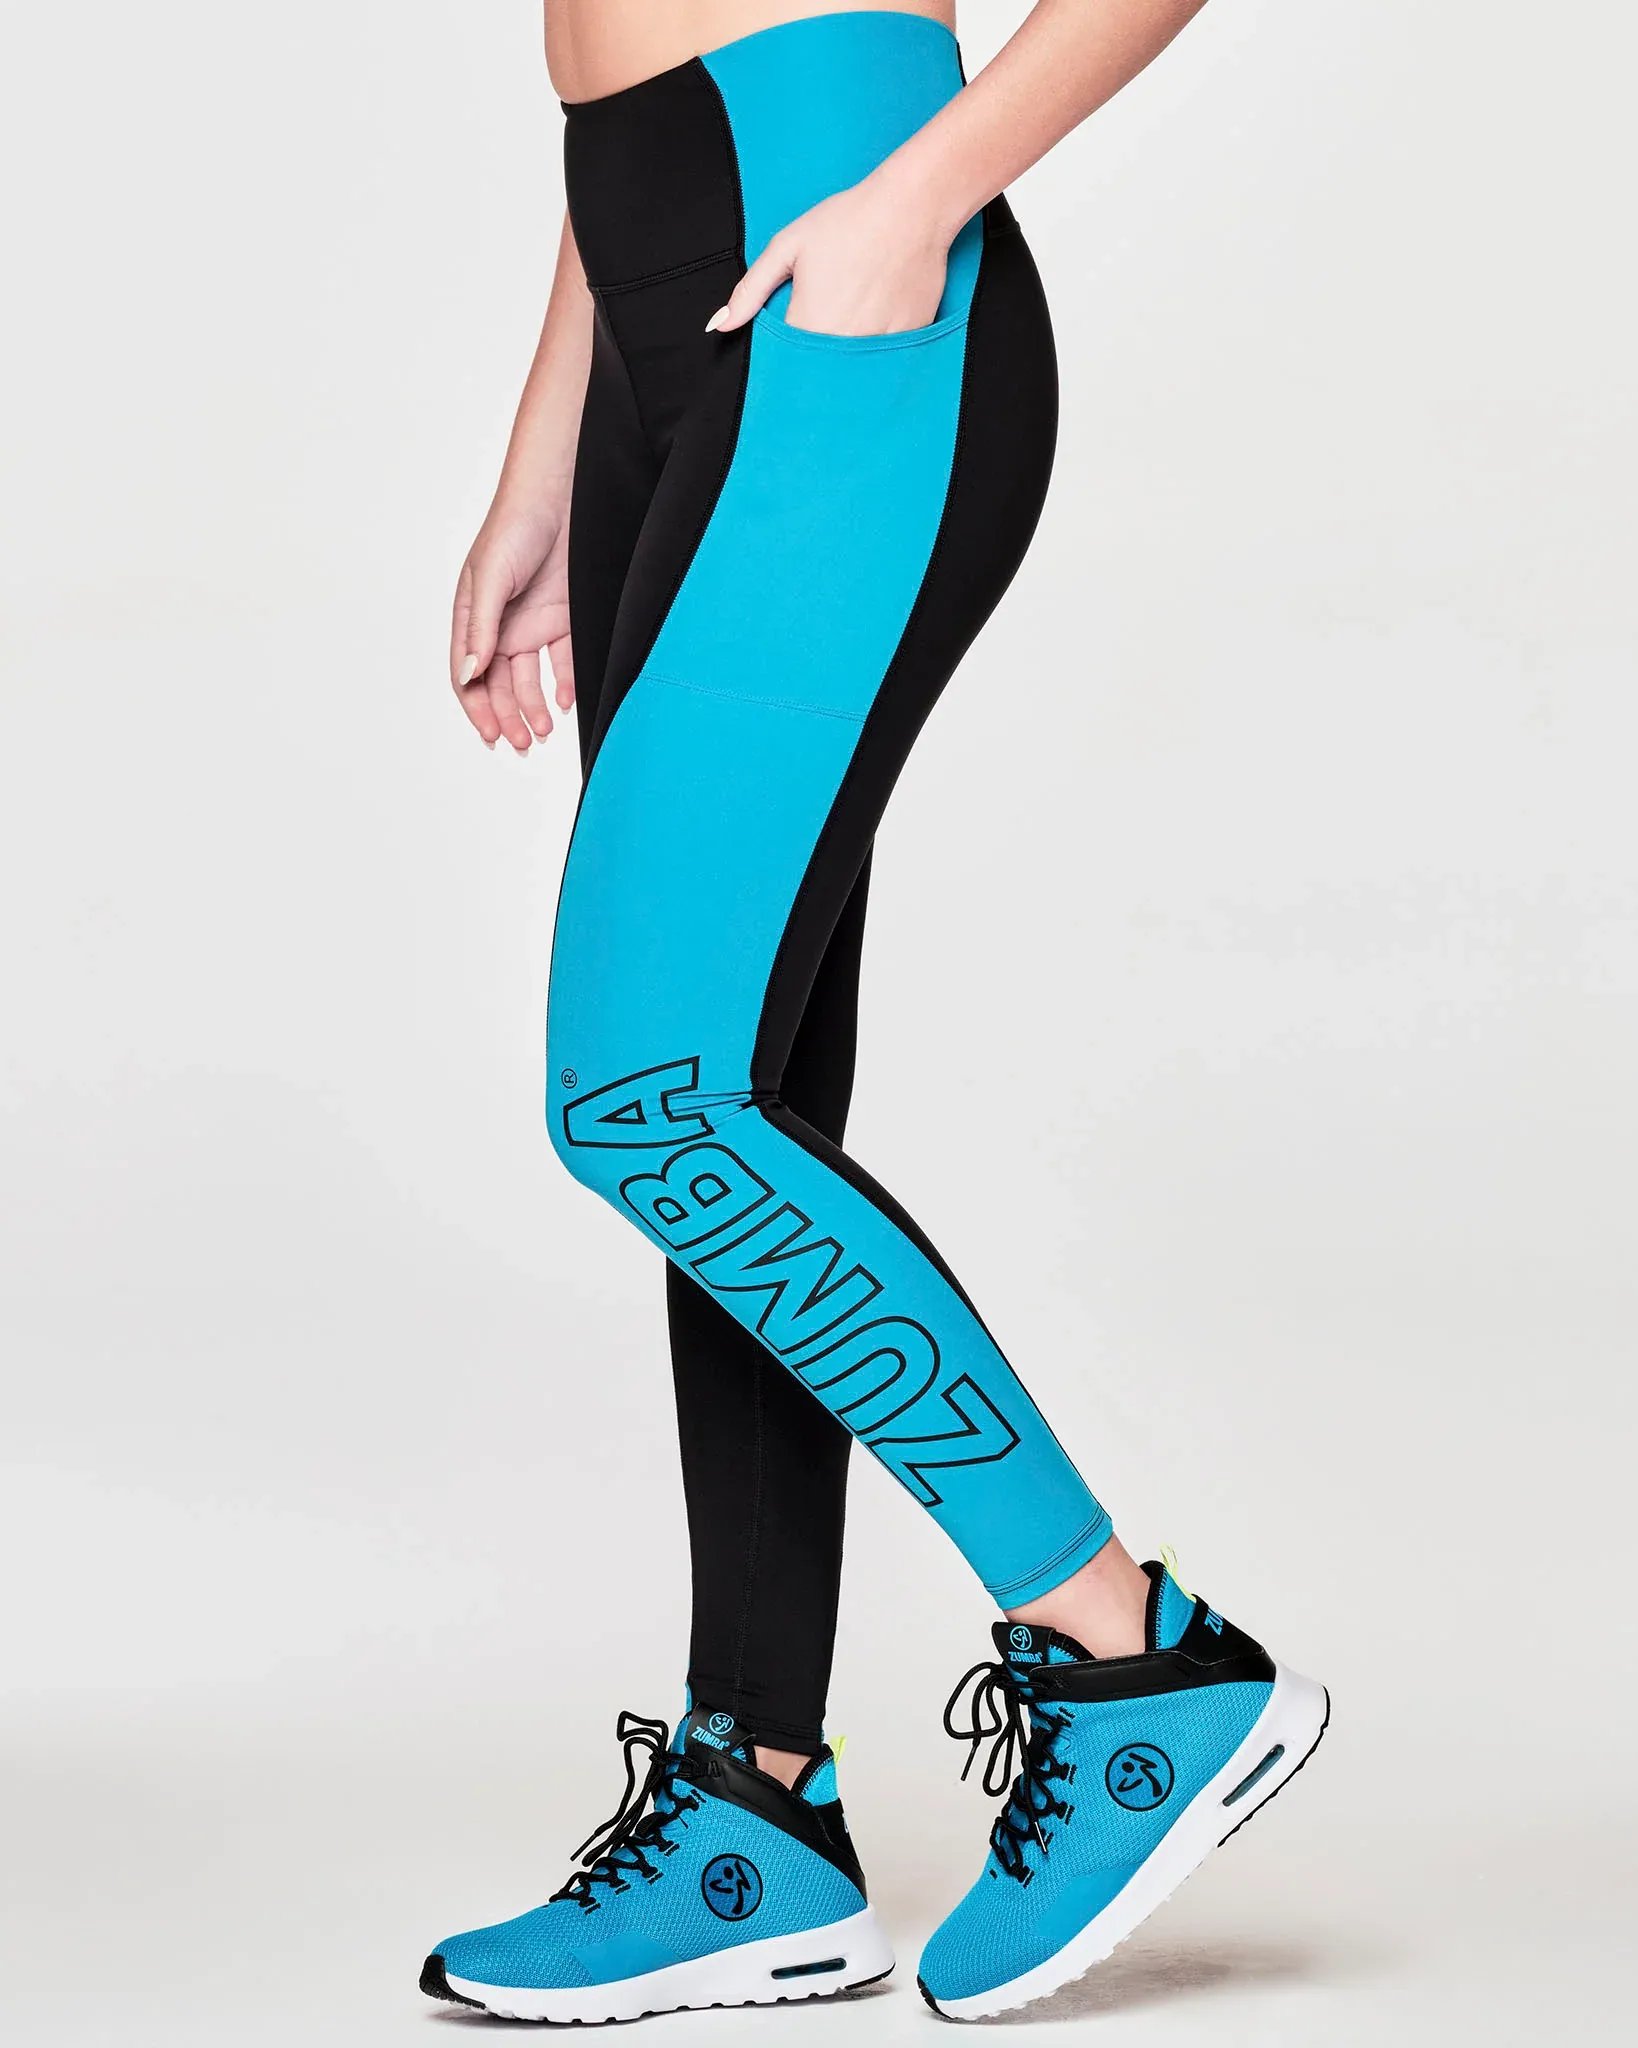  ZUMBA Women's High-Waisted Workout Leggings, Ankle